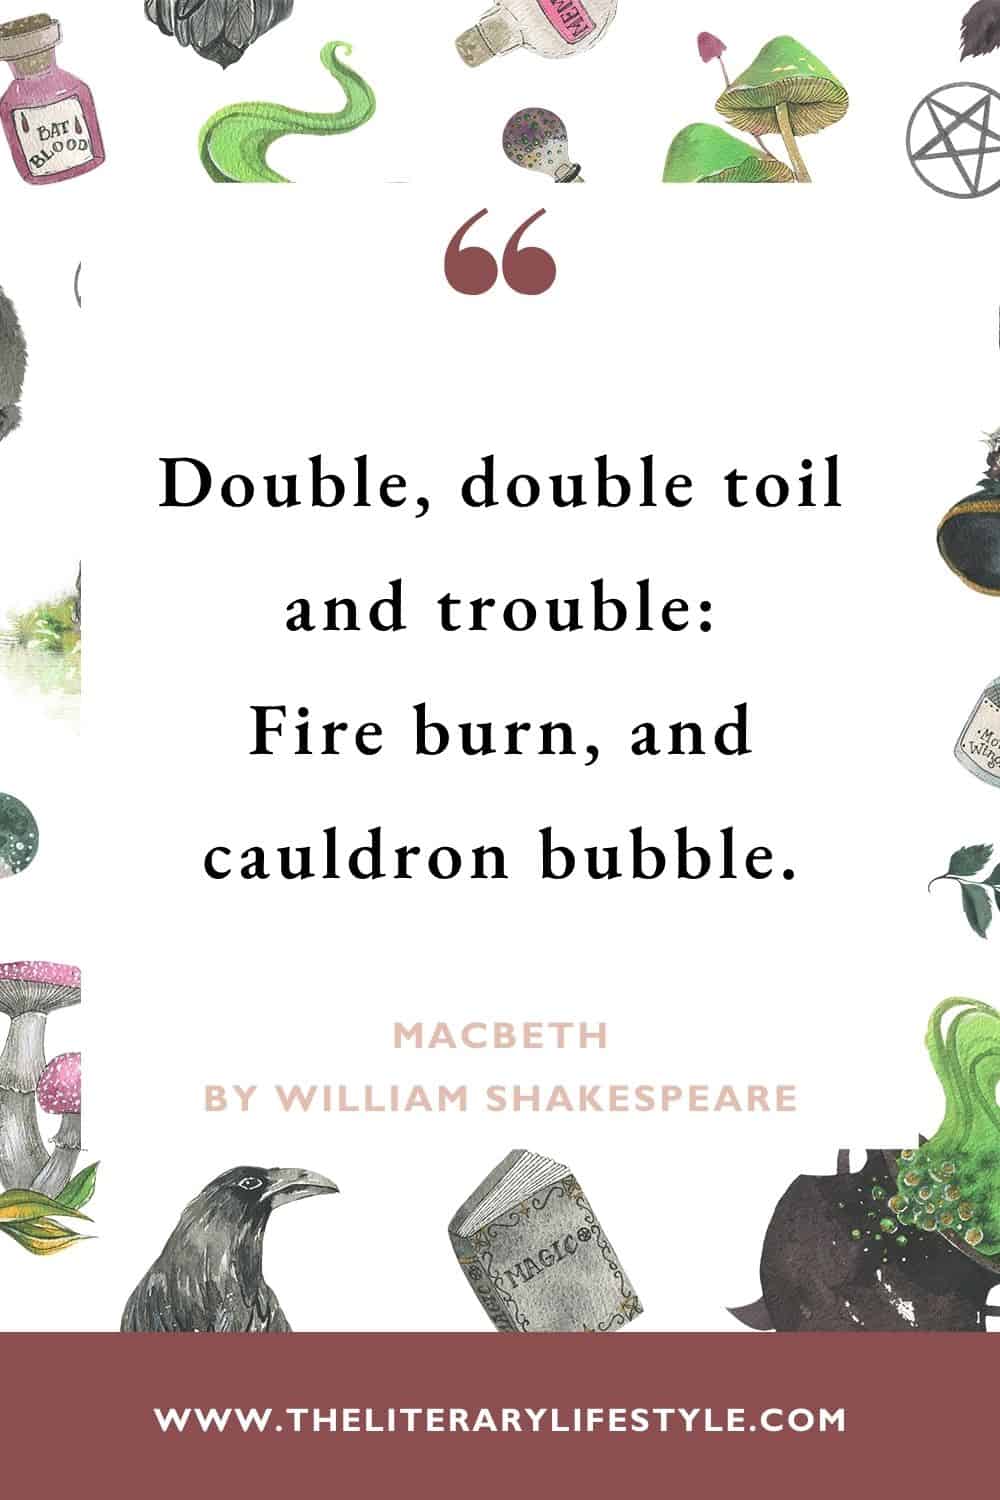 double, double toil and trouble: fire burn and cauldron bubble